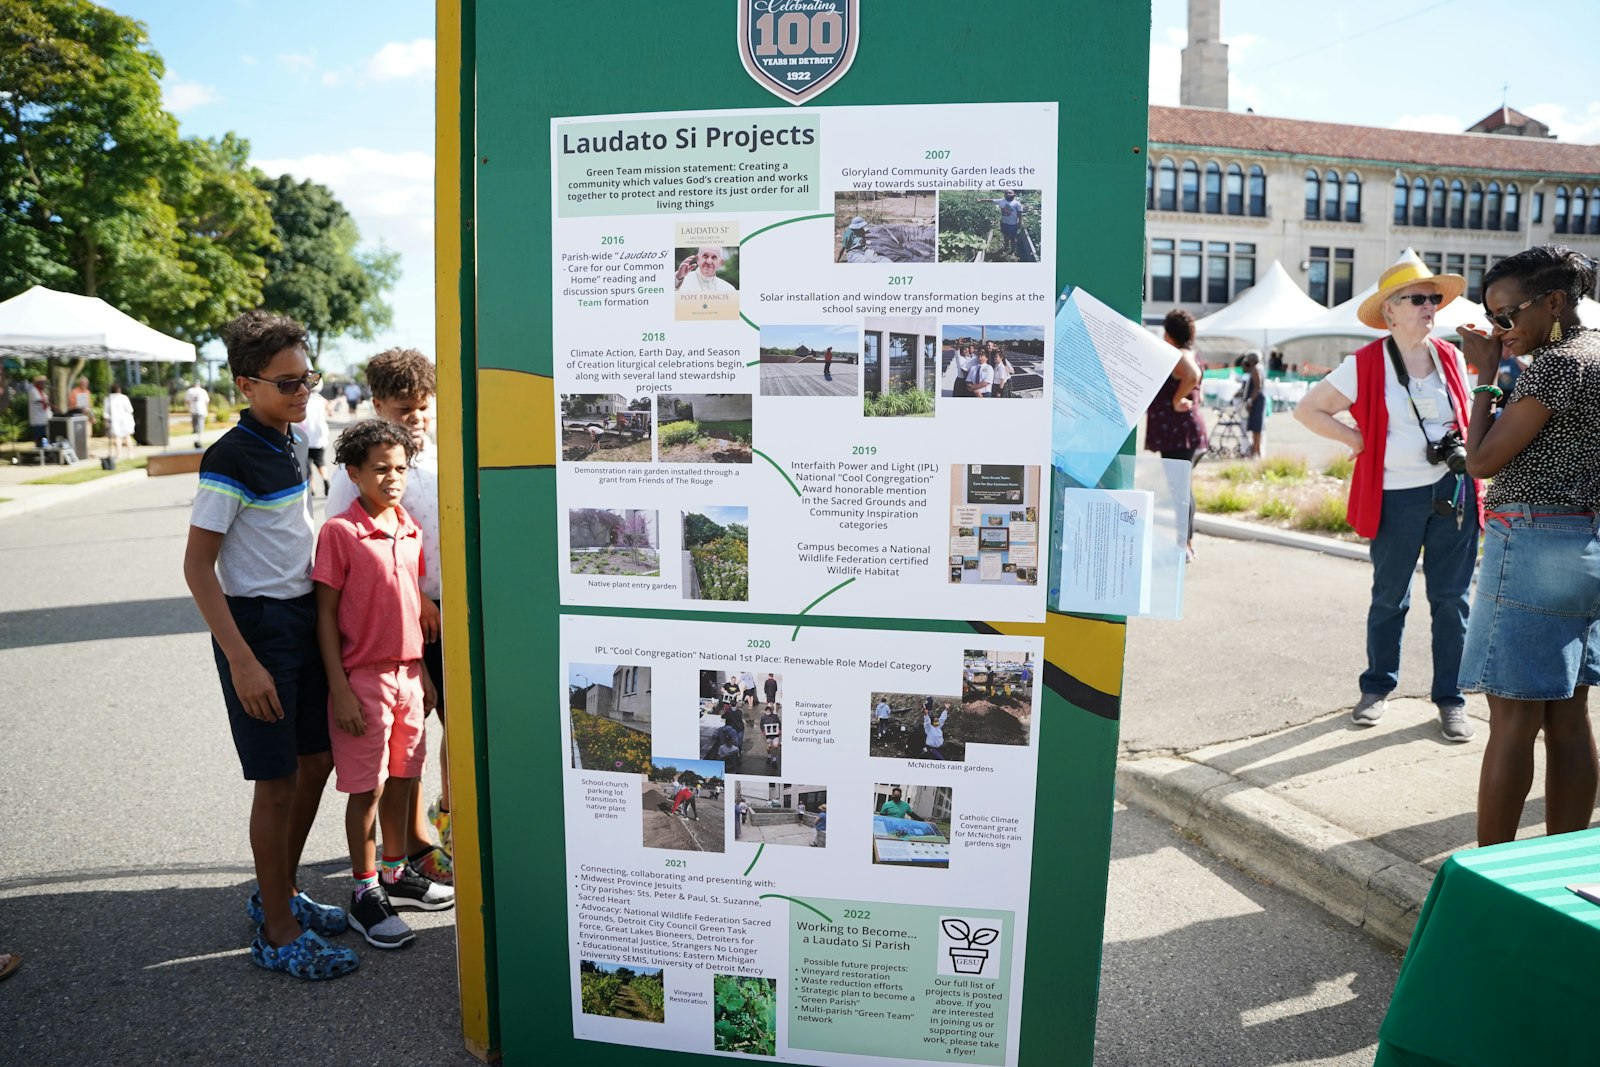 Sustainability and living out Pope Francis’ apostolic letter, Laudato Si', is a key concern for Gesu’s Green Team, which completed a $1.5 million renovation to the parish grounds to better conserve runoff water and reduce the parish’s drain and sewage bill.